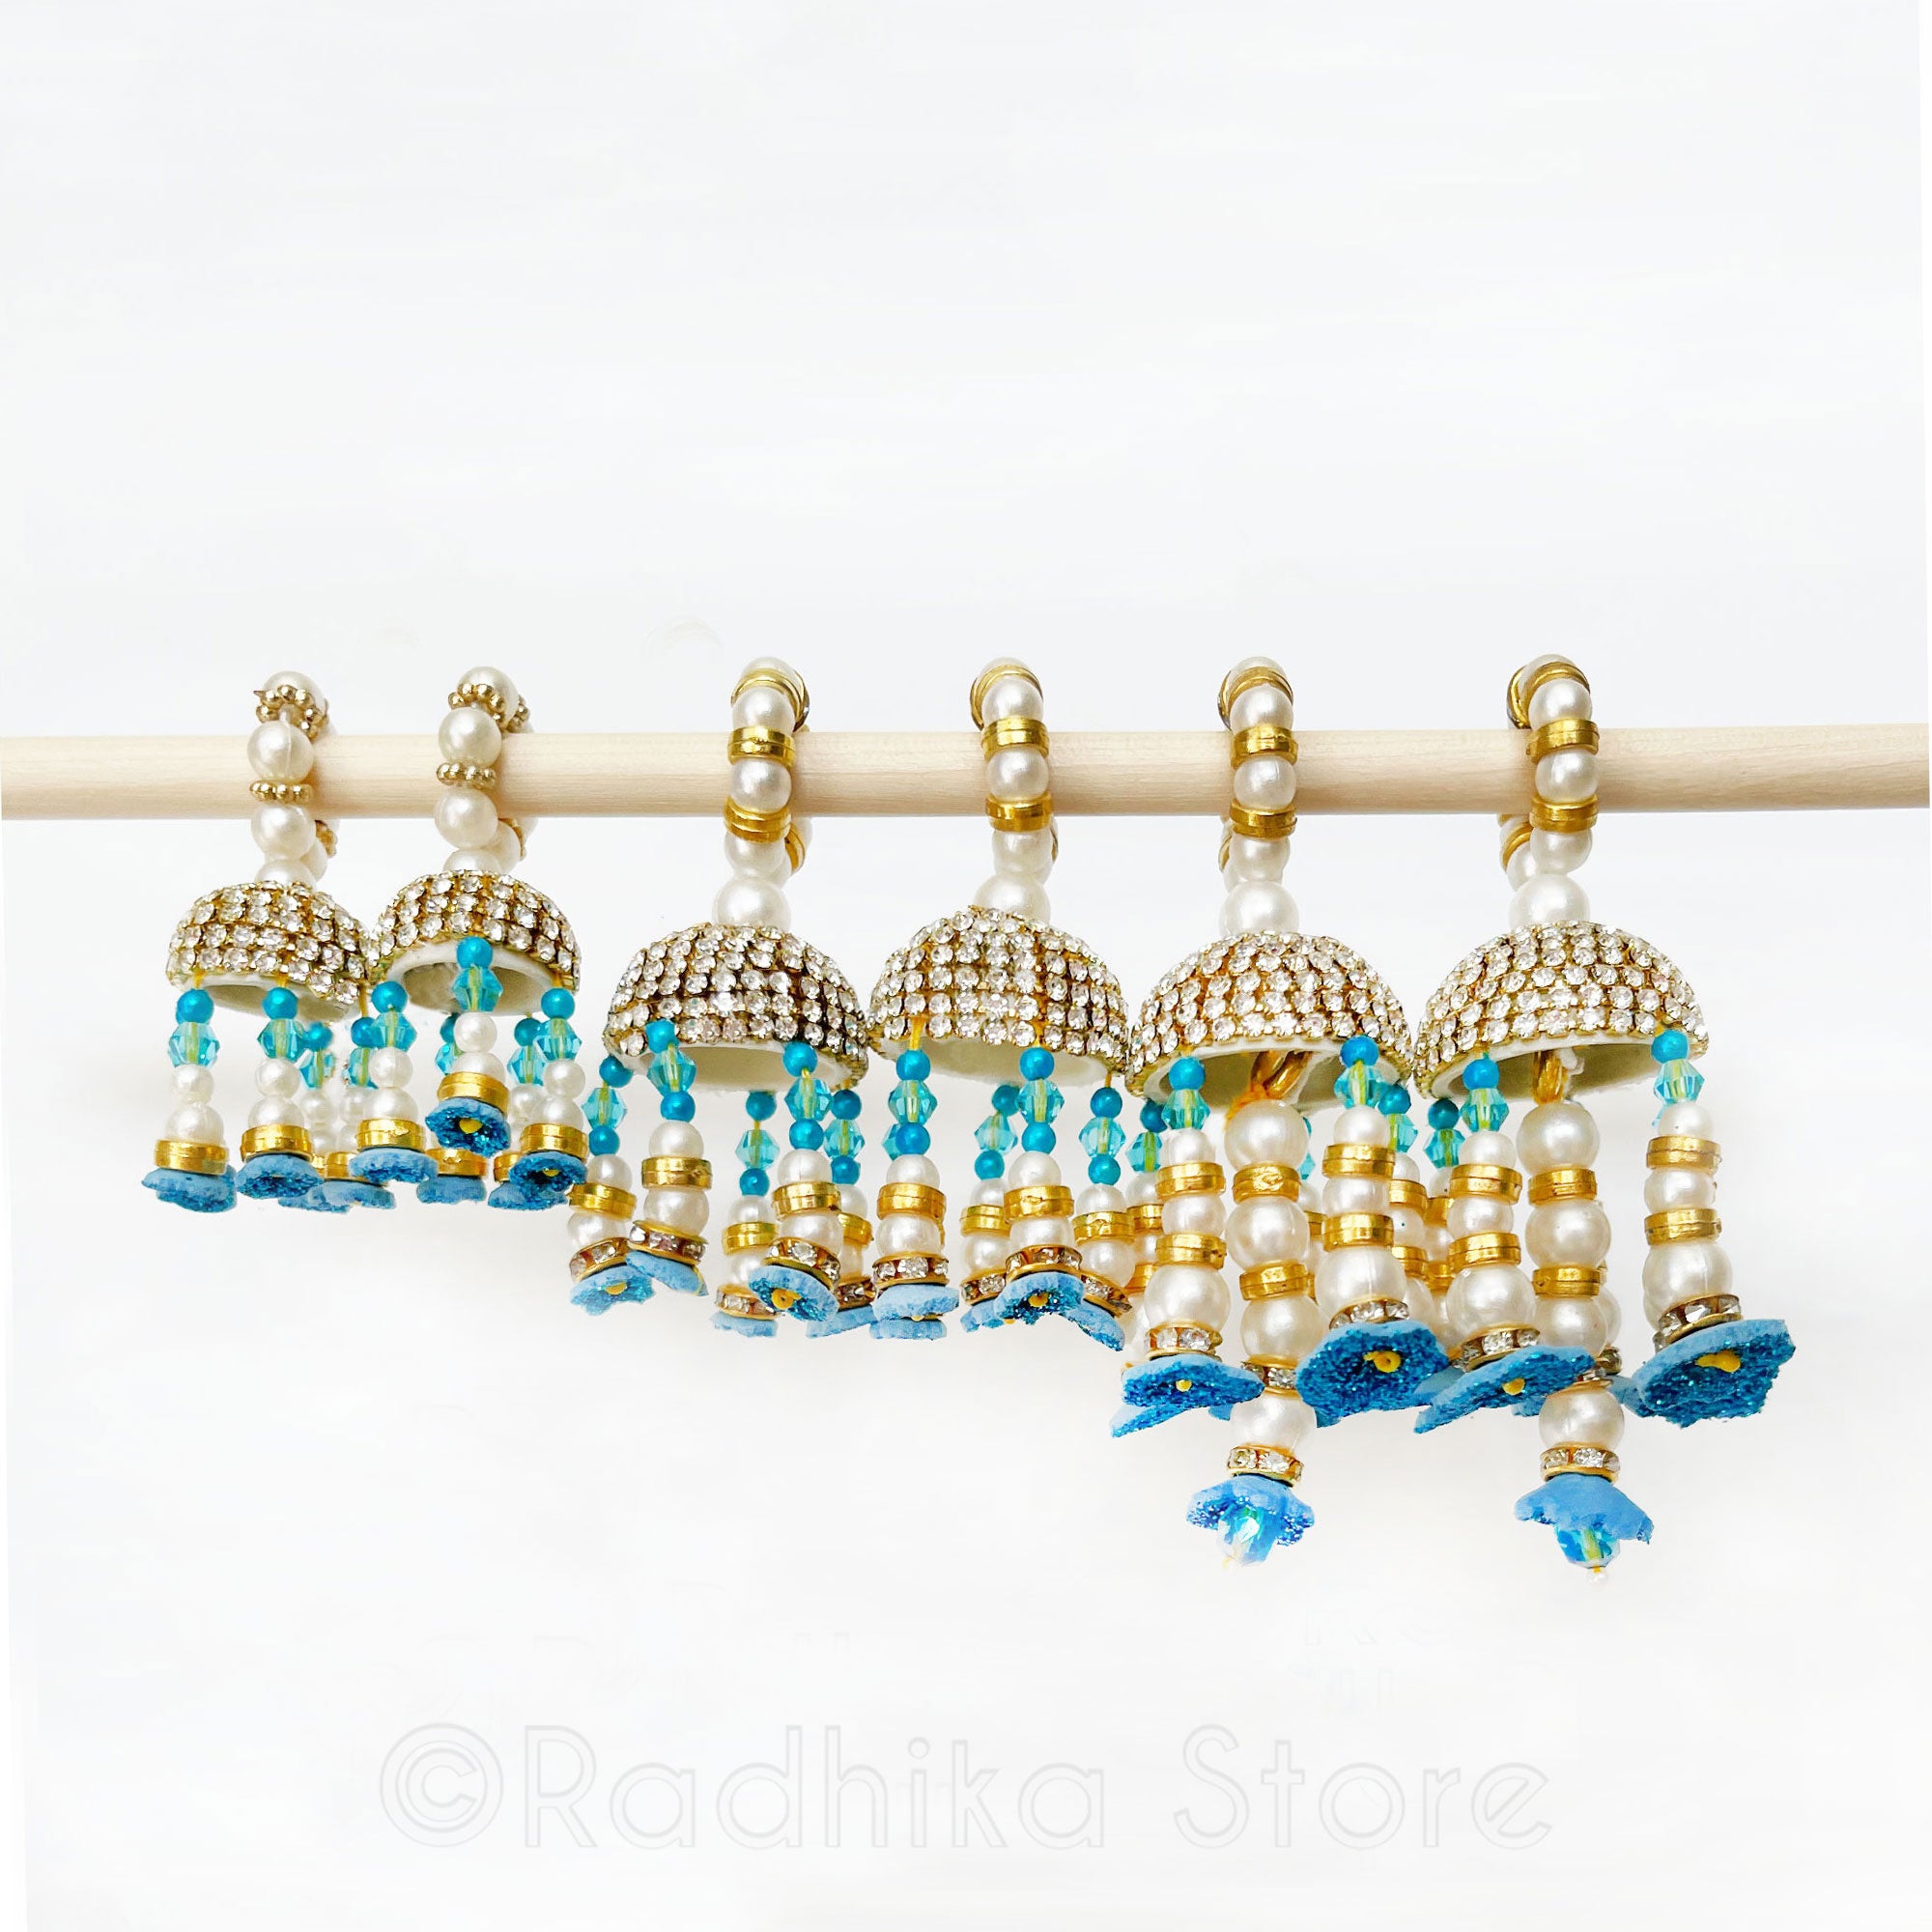 Vrindavan Flower Bell Bangles - Teal Blue, Yellow and Purple - Set of 2